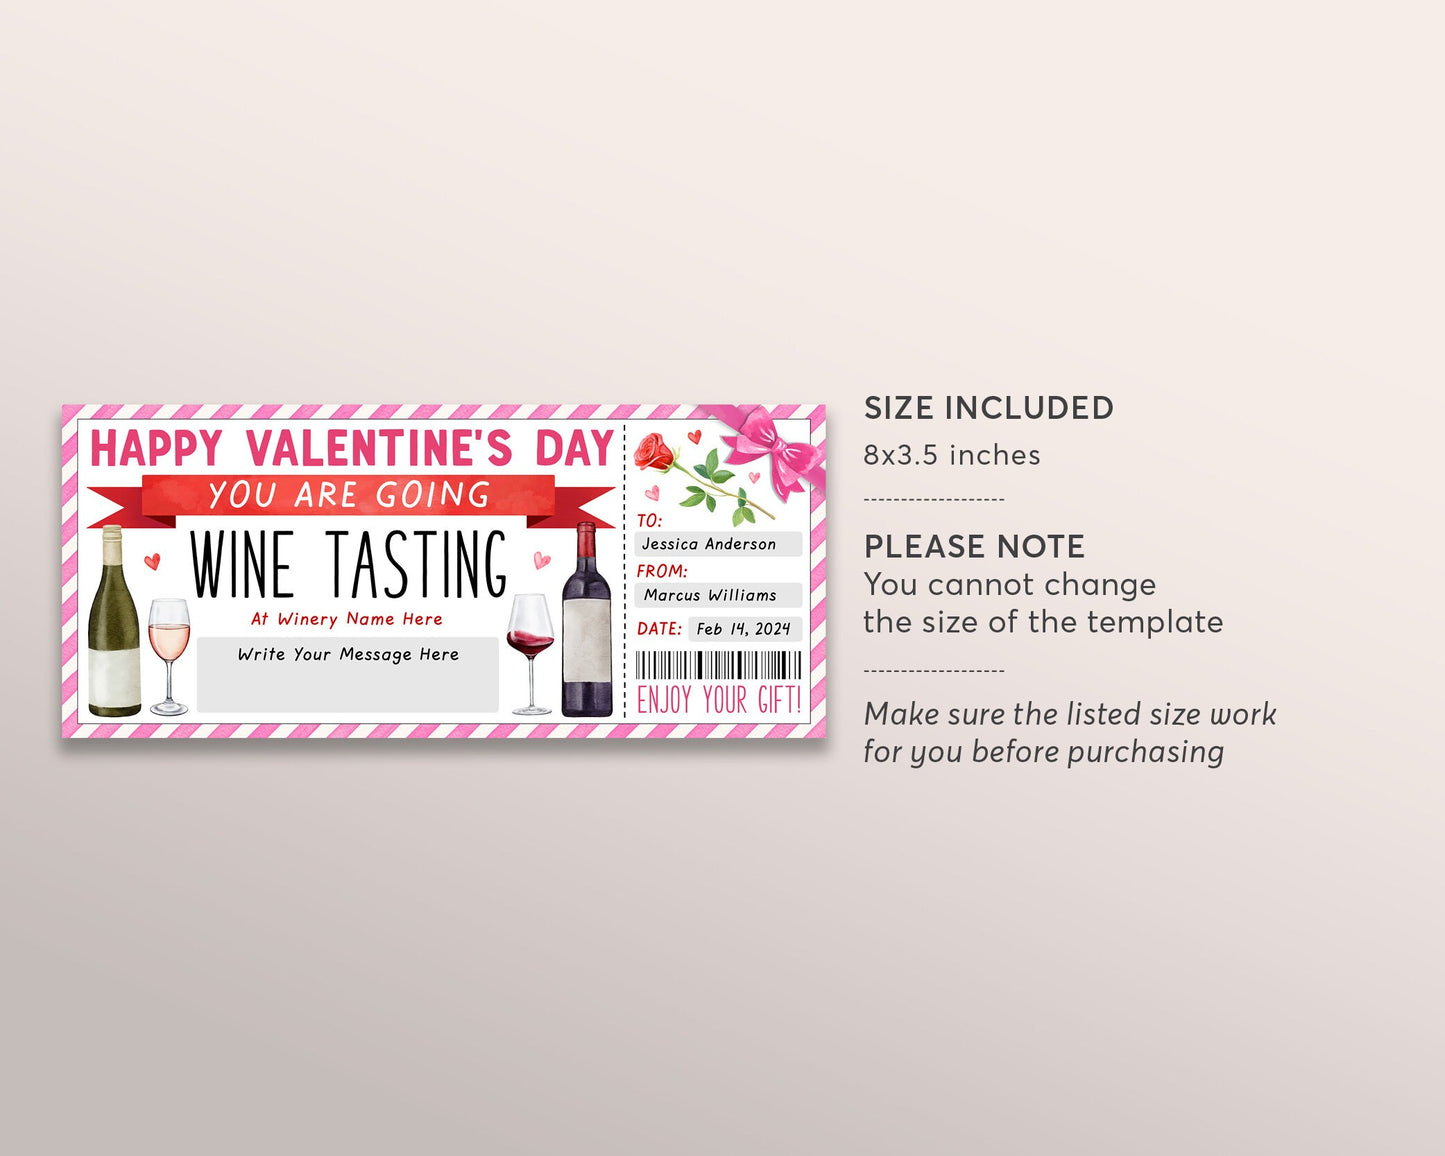 Valentines Day Wine Tasting Gift Voucher Editable Template, Anniversary Surprise Wine Tasting Ticket Gift Certificate, Winery Coupon Reveal